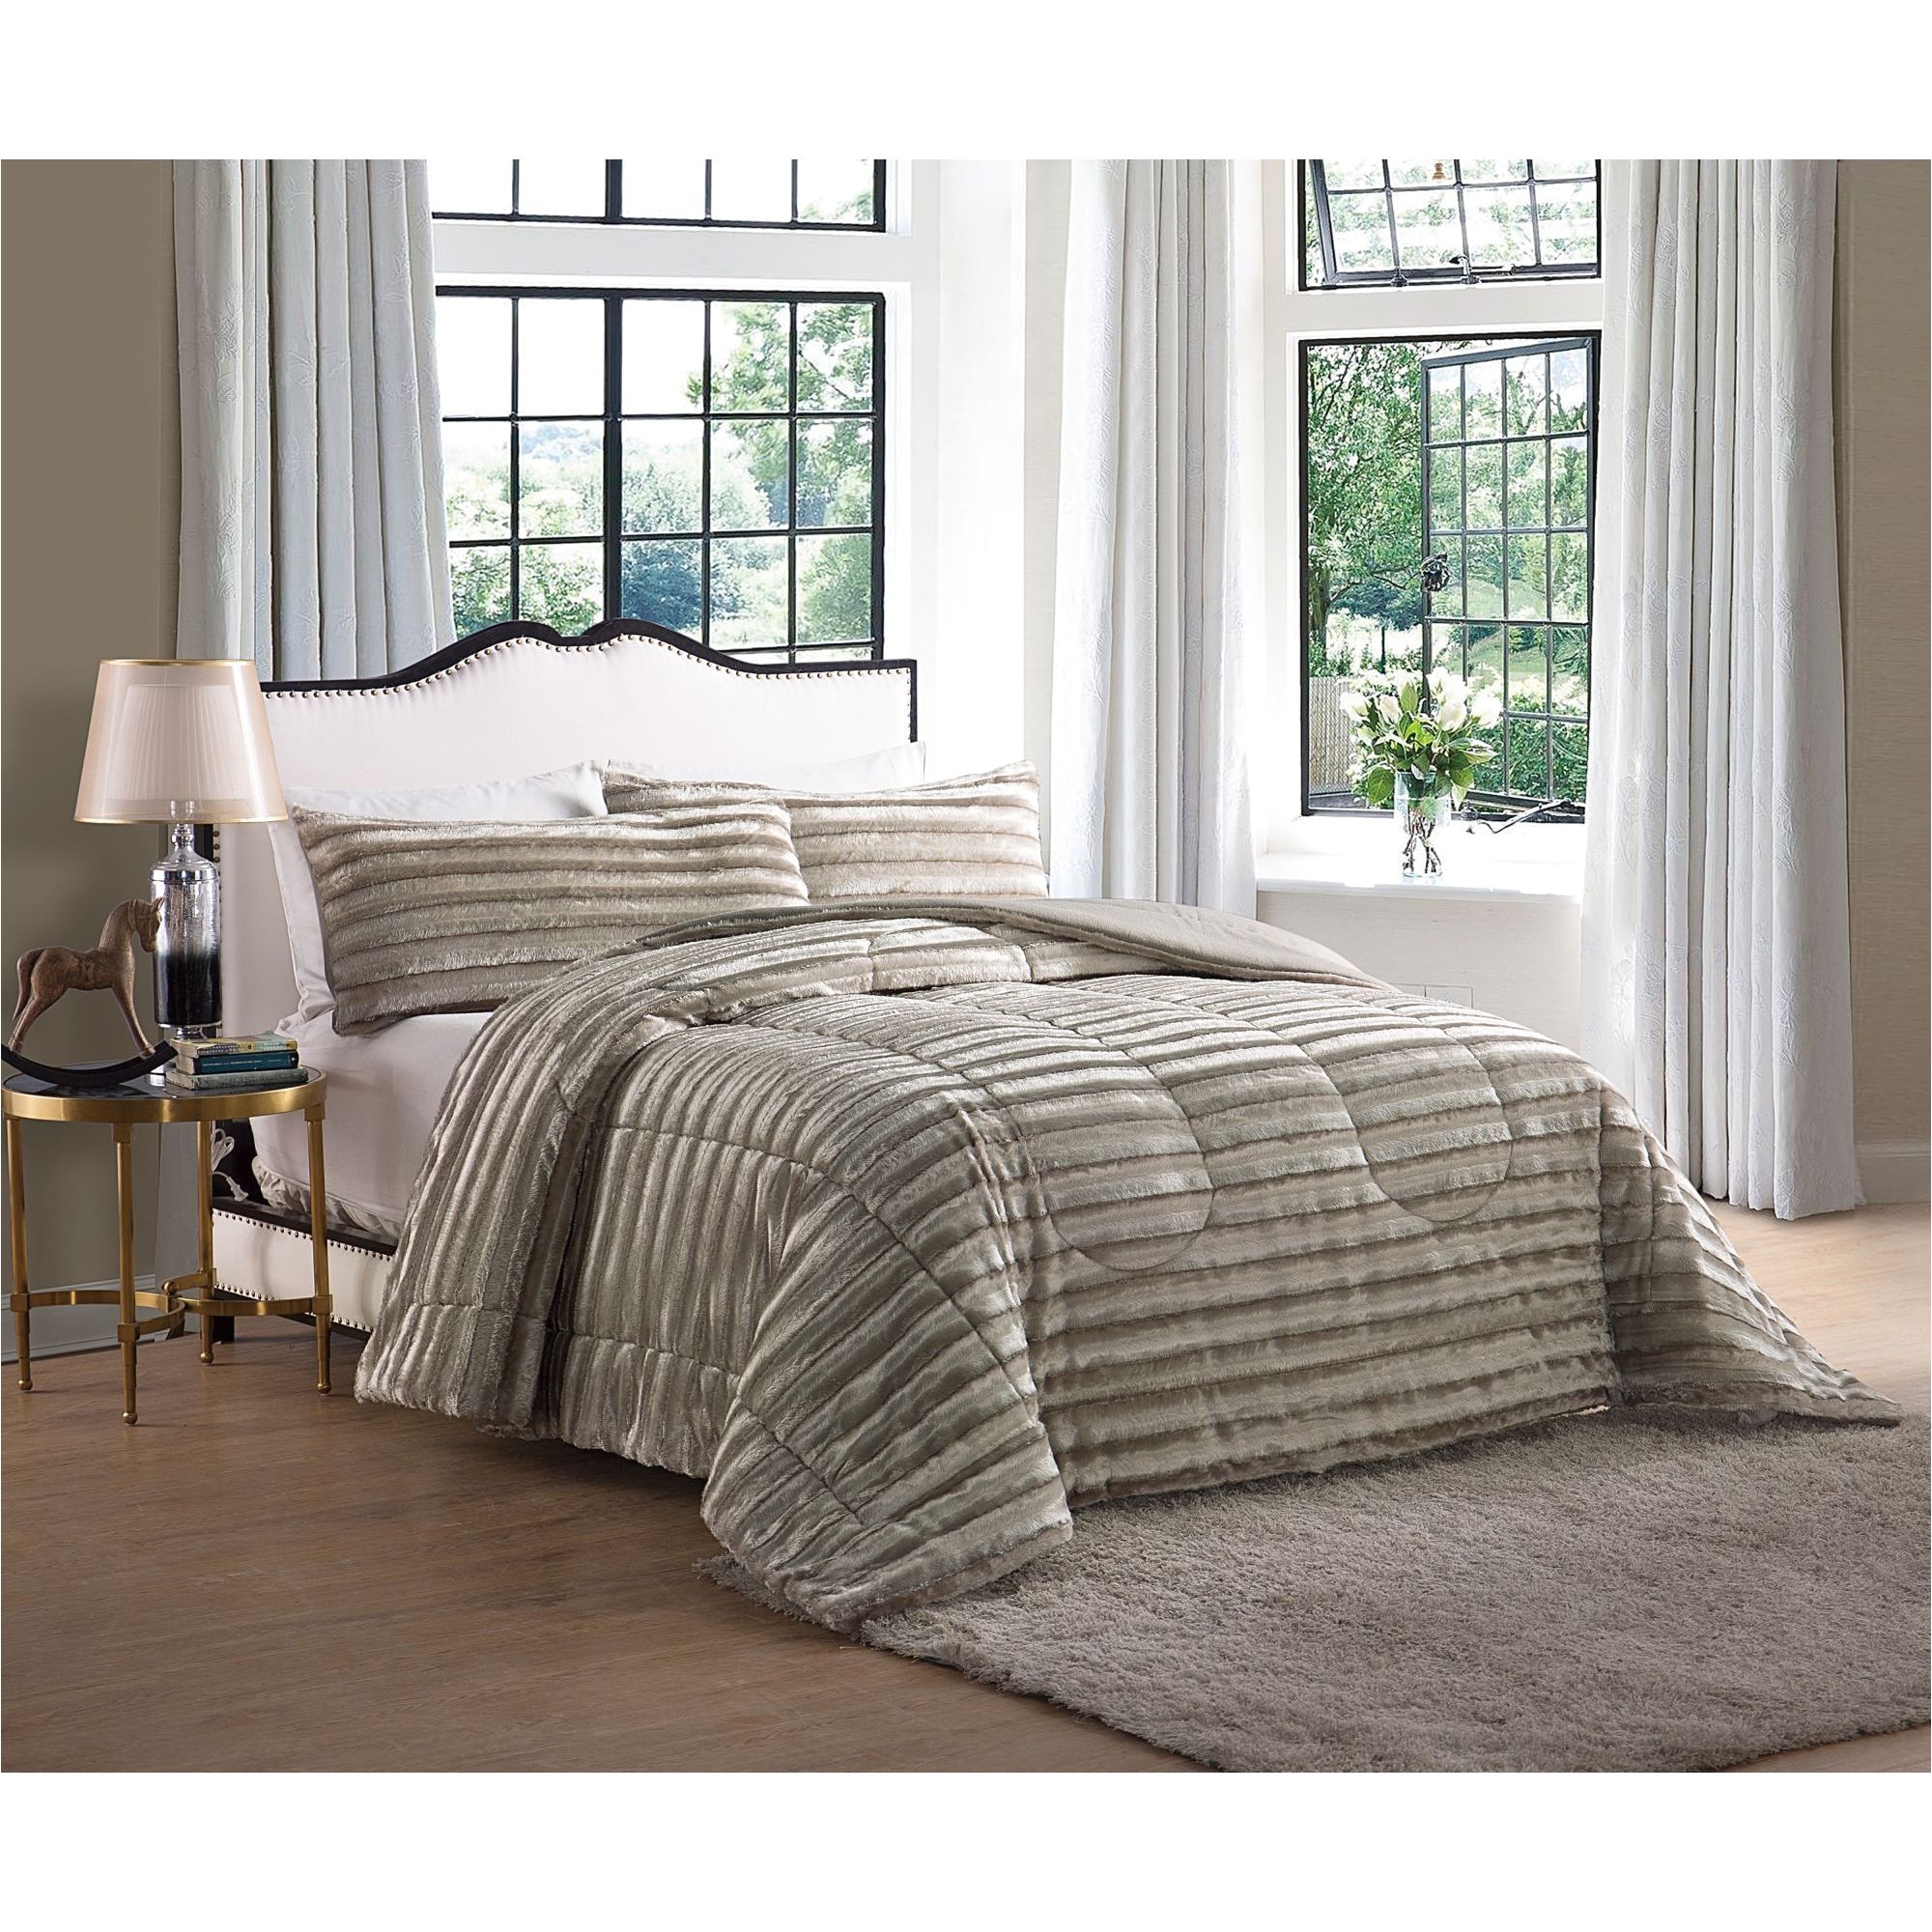 create a warm and cozy space with this luxurious faux fur comforter the beautiful design